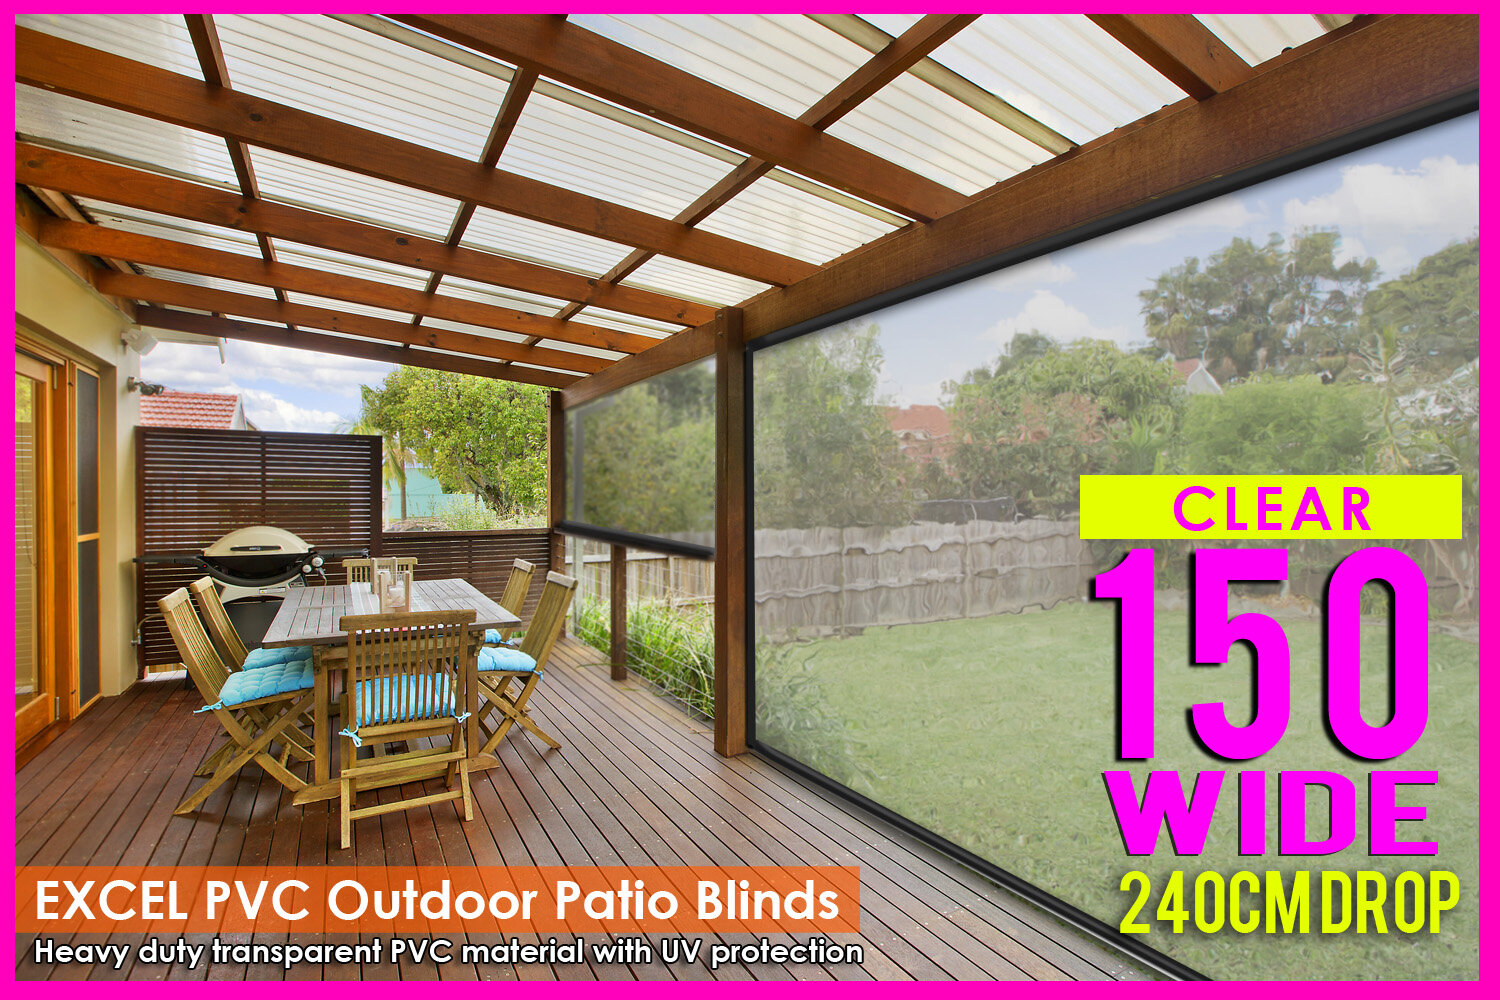 Details About 150 X 240cm Pvc Blind Clear Patio Bistro Heavy Duty Outdoor Veranda Cafe in dimensions 1500 X 1000